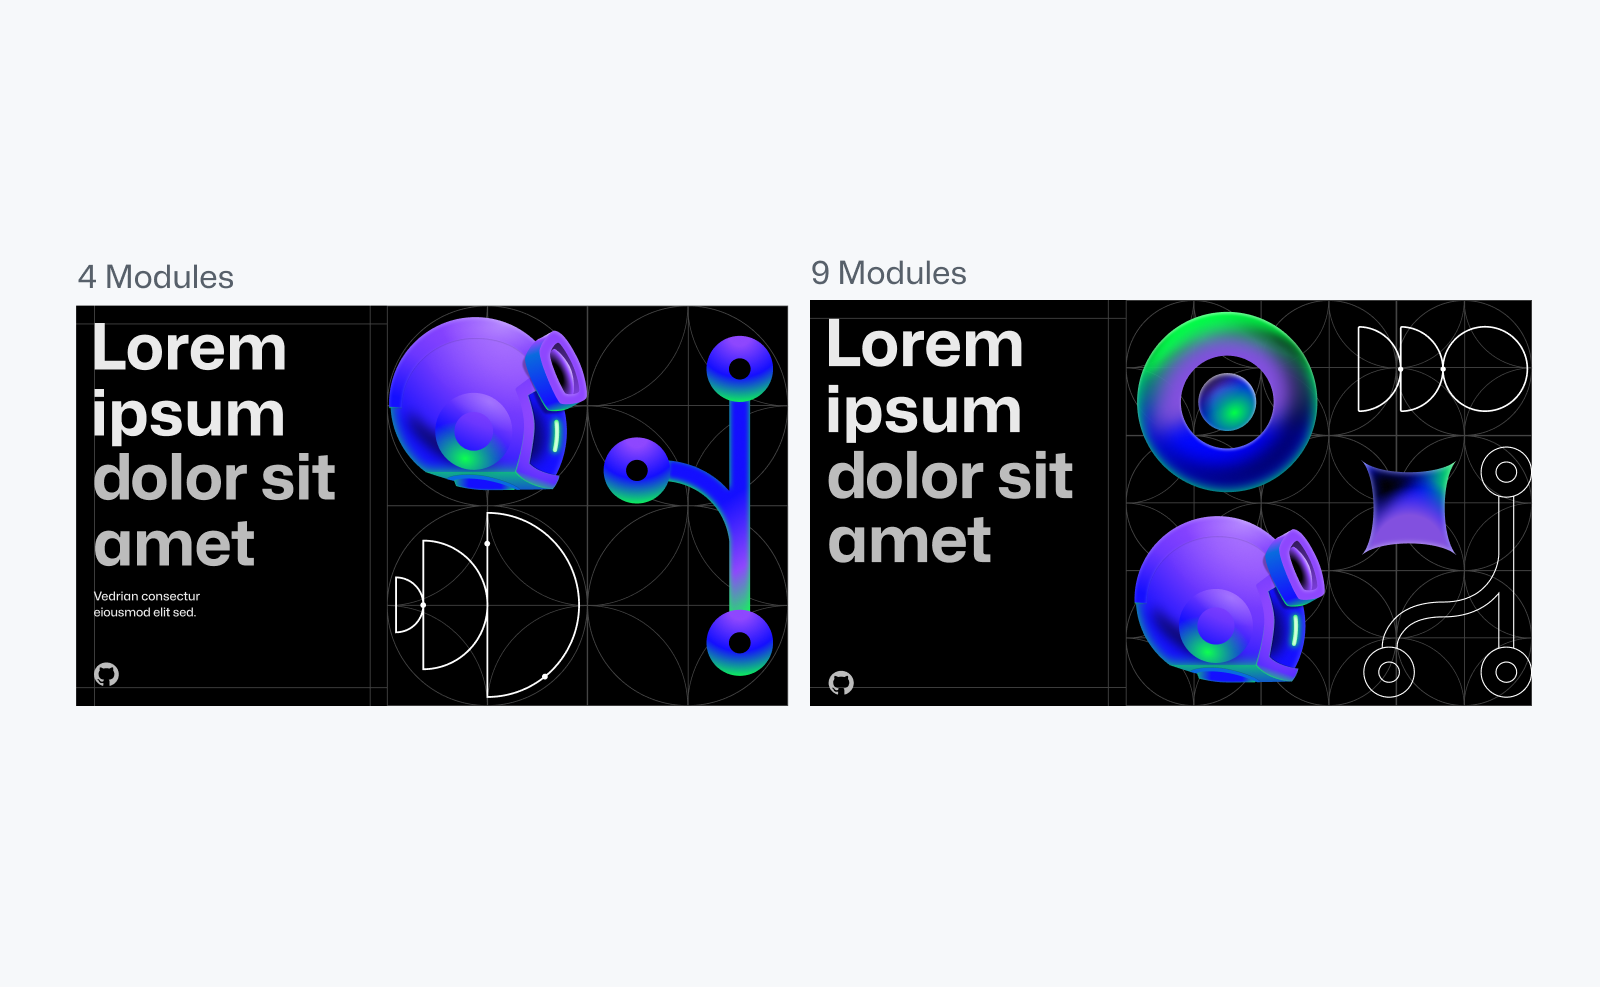 Two black landscape rectangular compositions side by side. Text above them reads "4 modules" and "9 modules" respectively. Compositions feature placeholder lorem ipsum text on the left in white and light gray, with abstract illustrations on the right.